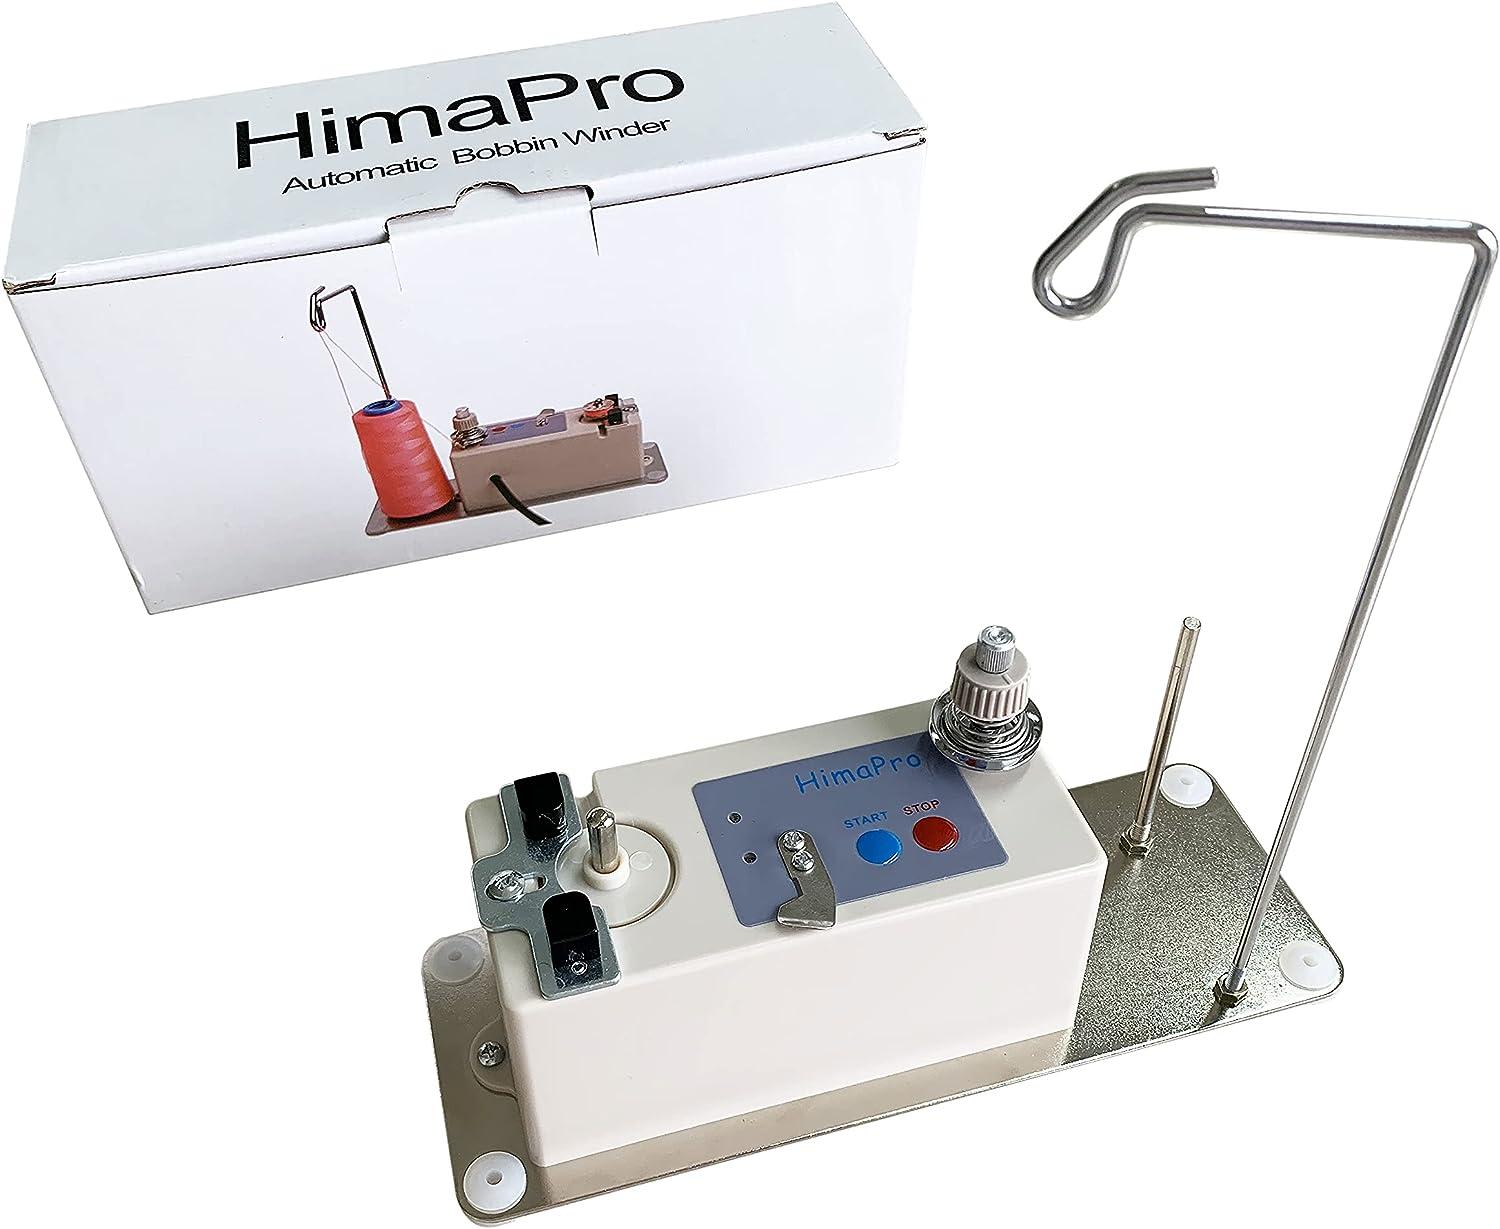 HimaPro Automatic Bobbin Winder for Sewing Machine Electrical Bobbin Winder  Electric Bobbin Winder - Adjustable Bobbin Slot - Fast and Efficient  Winding Experience